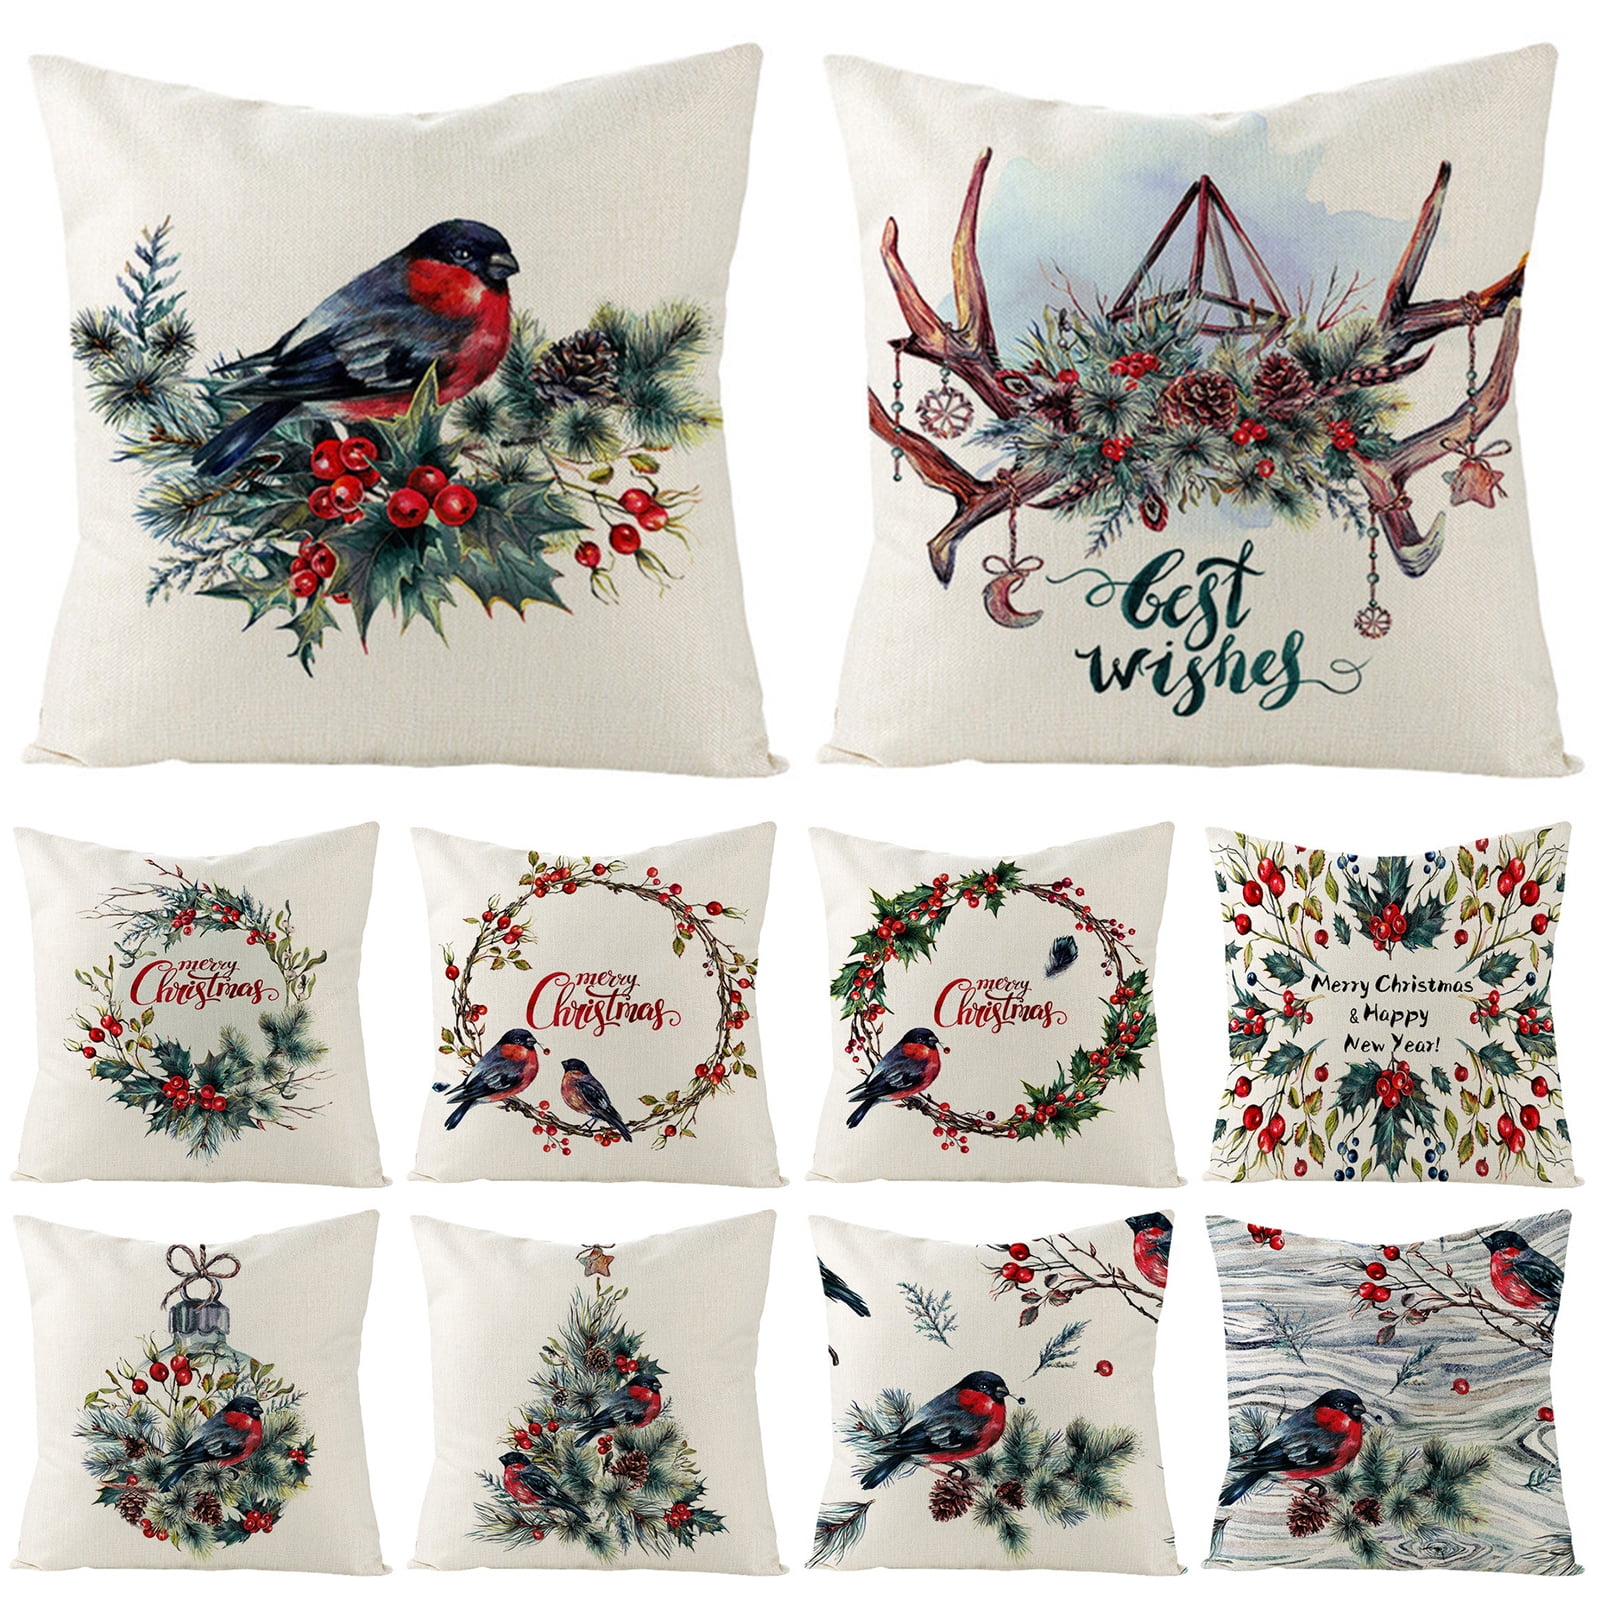 Details about   18" Xmas Christmas Pillow Case Cushion Cover Waist Throw Sofa Gifts Home Decors 